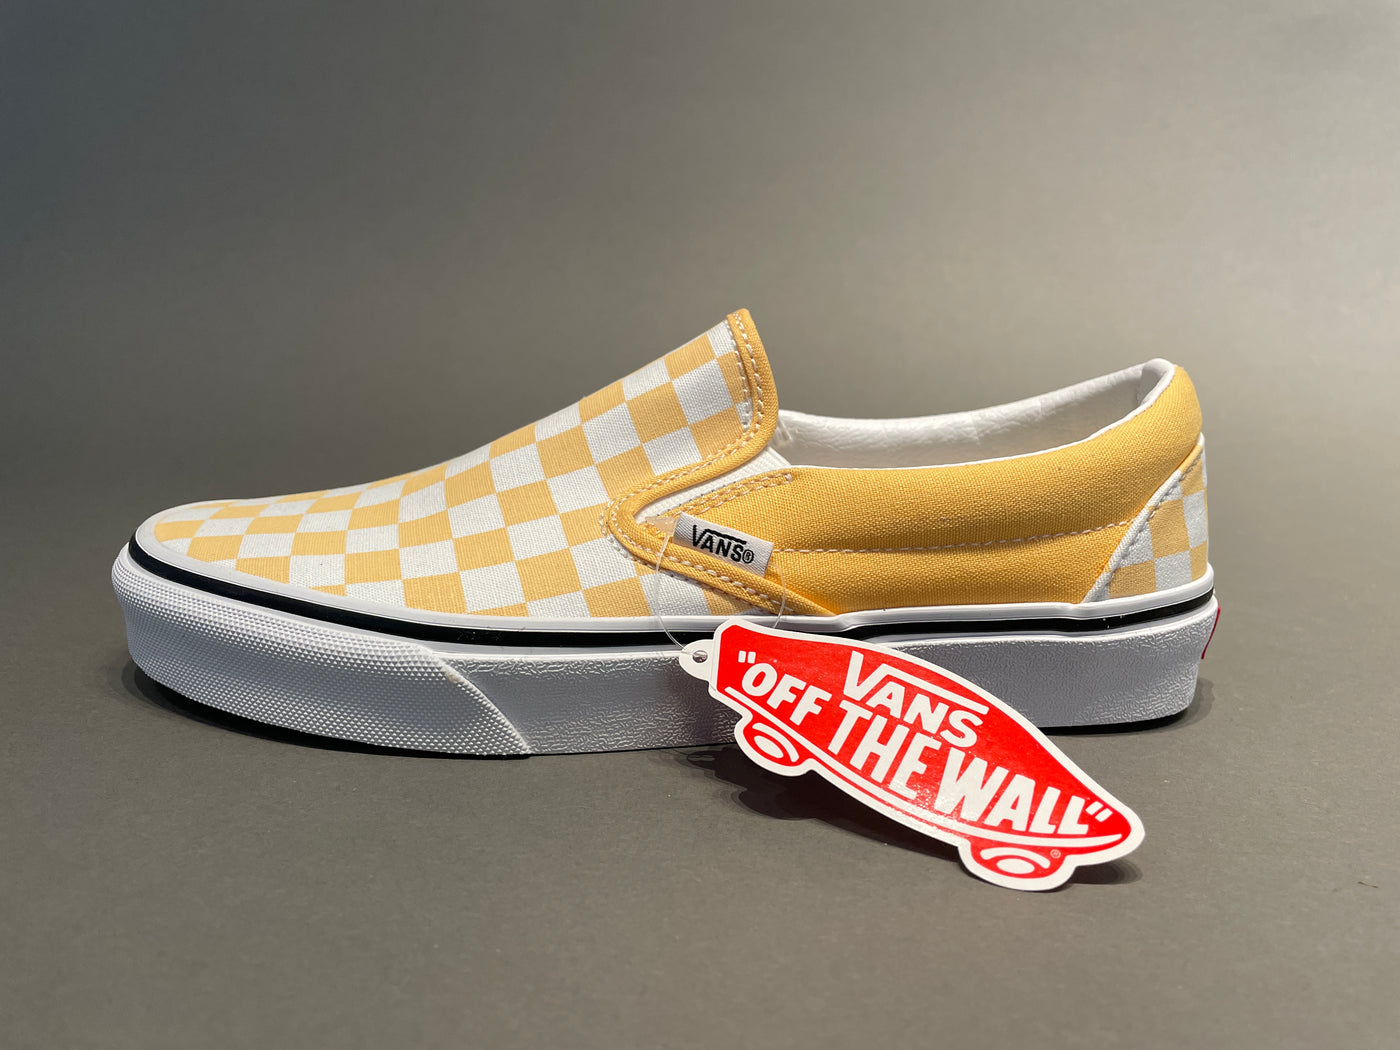 Vans Classic Checkerboard White & Yellow Slip-On Shoes